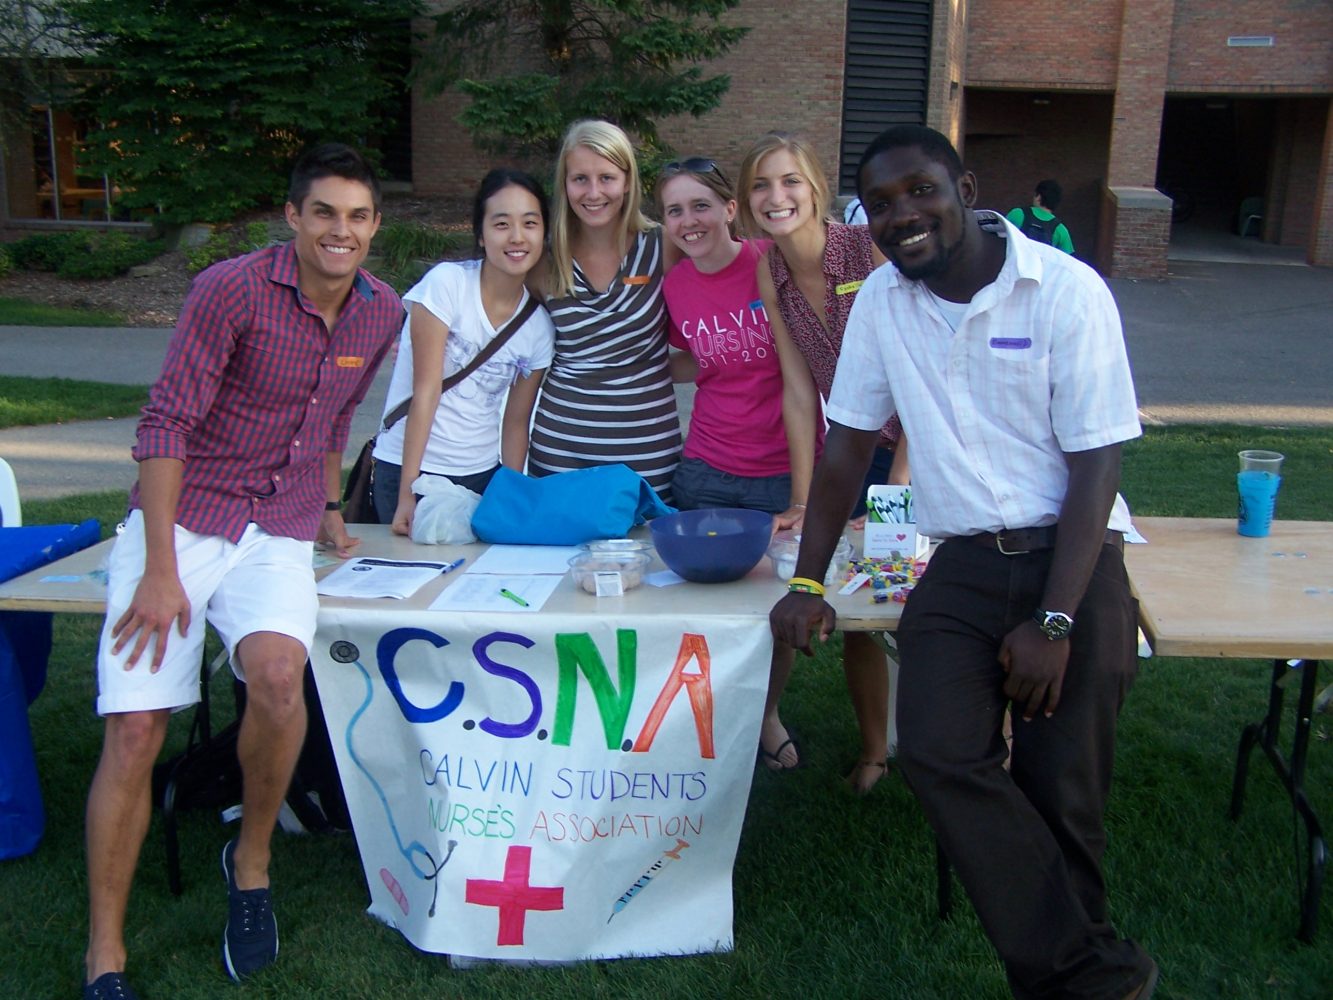 Members of the Calvin Students Nurses Association recruit new members at Cokes and Clubs. Photo by Connor Sterchi